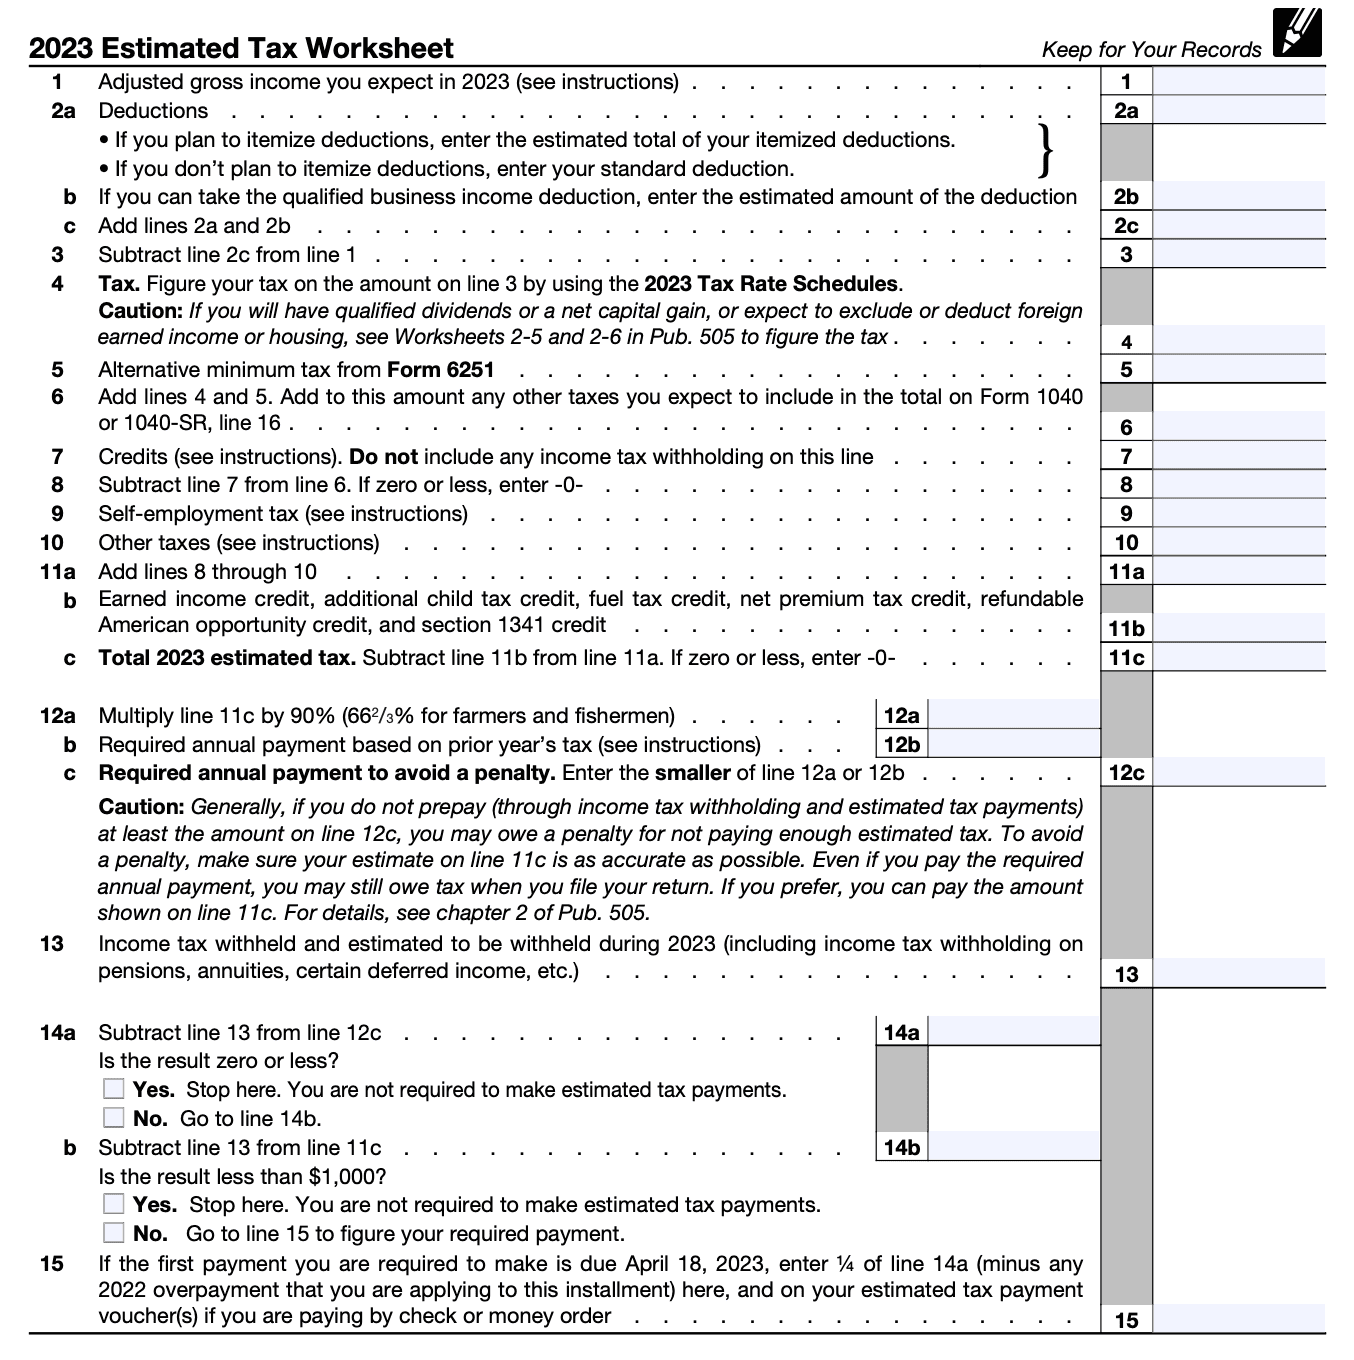 fill-out-the-2023-estimated-tax-worksheet-for-form-1040-es.png